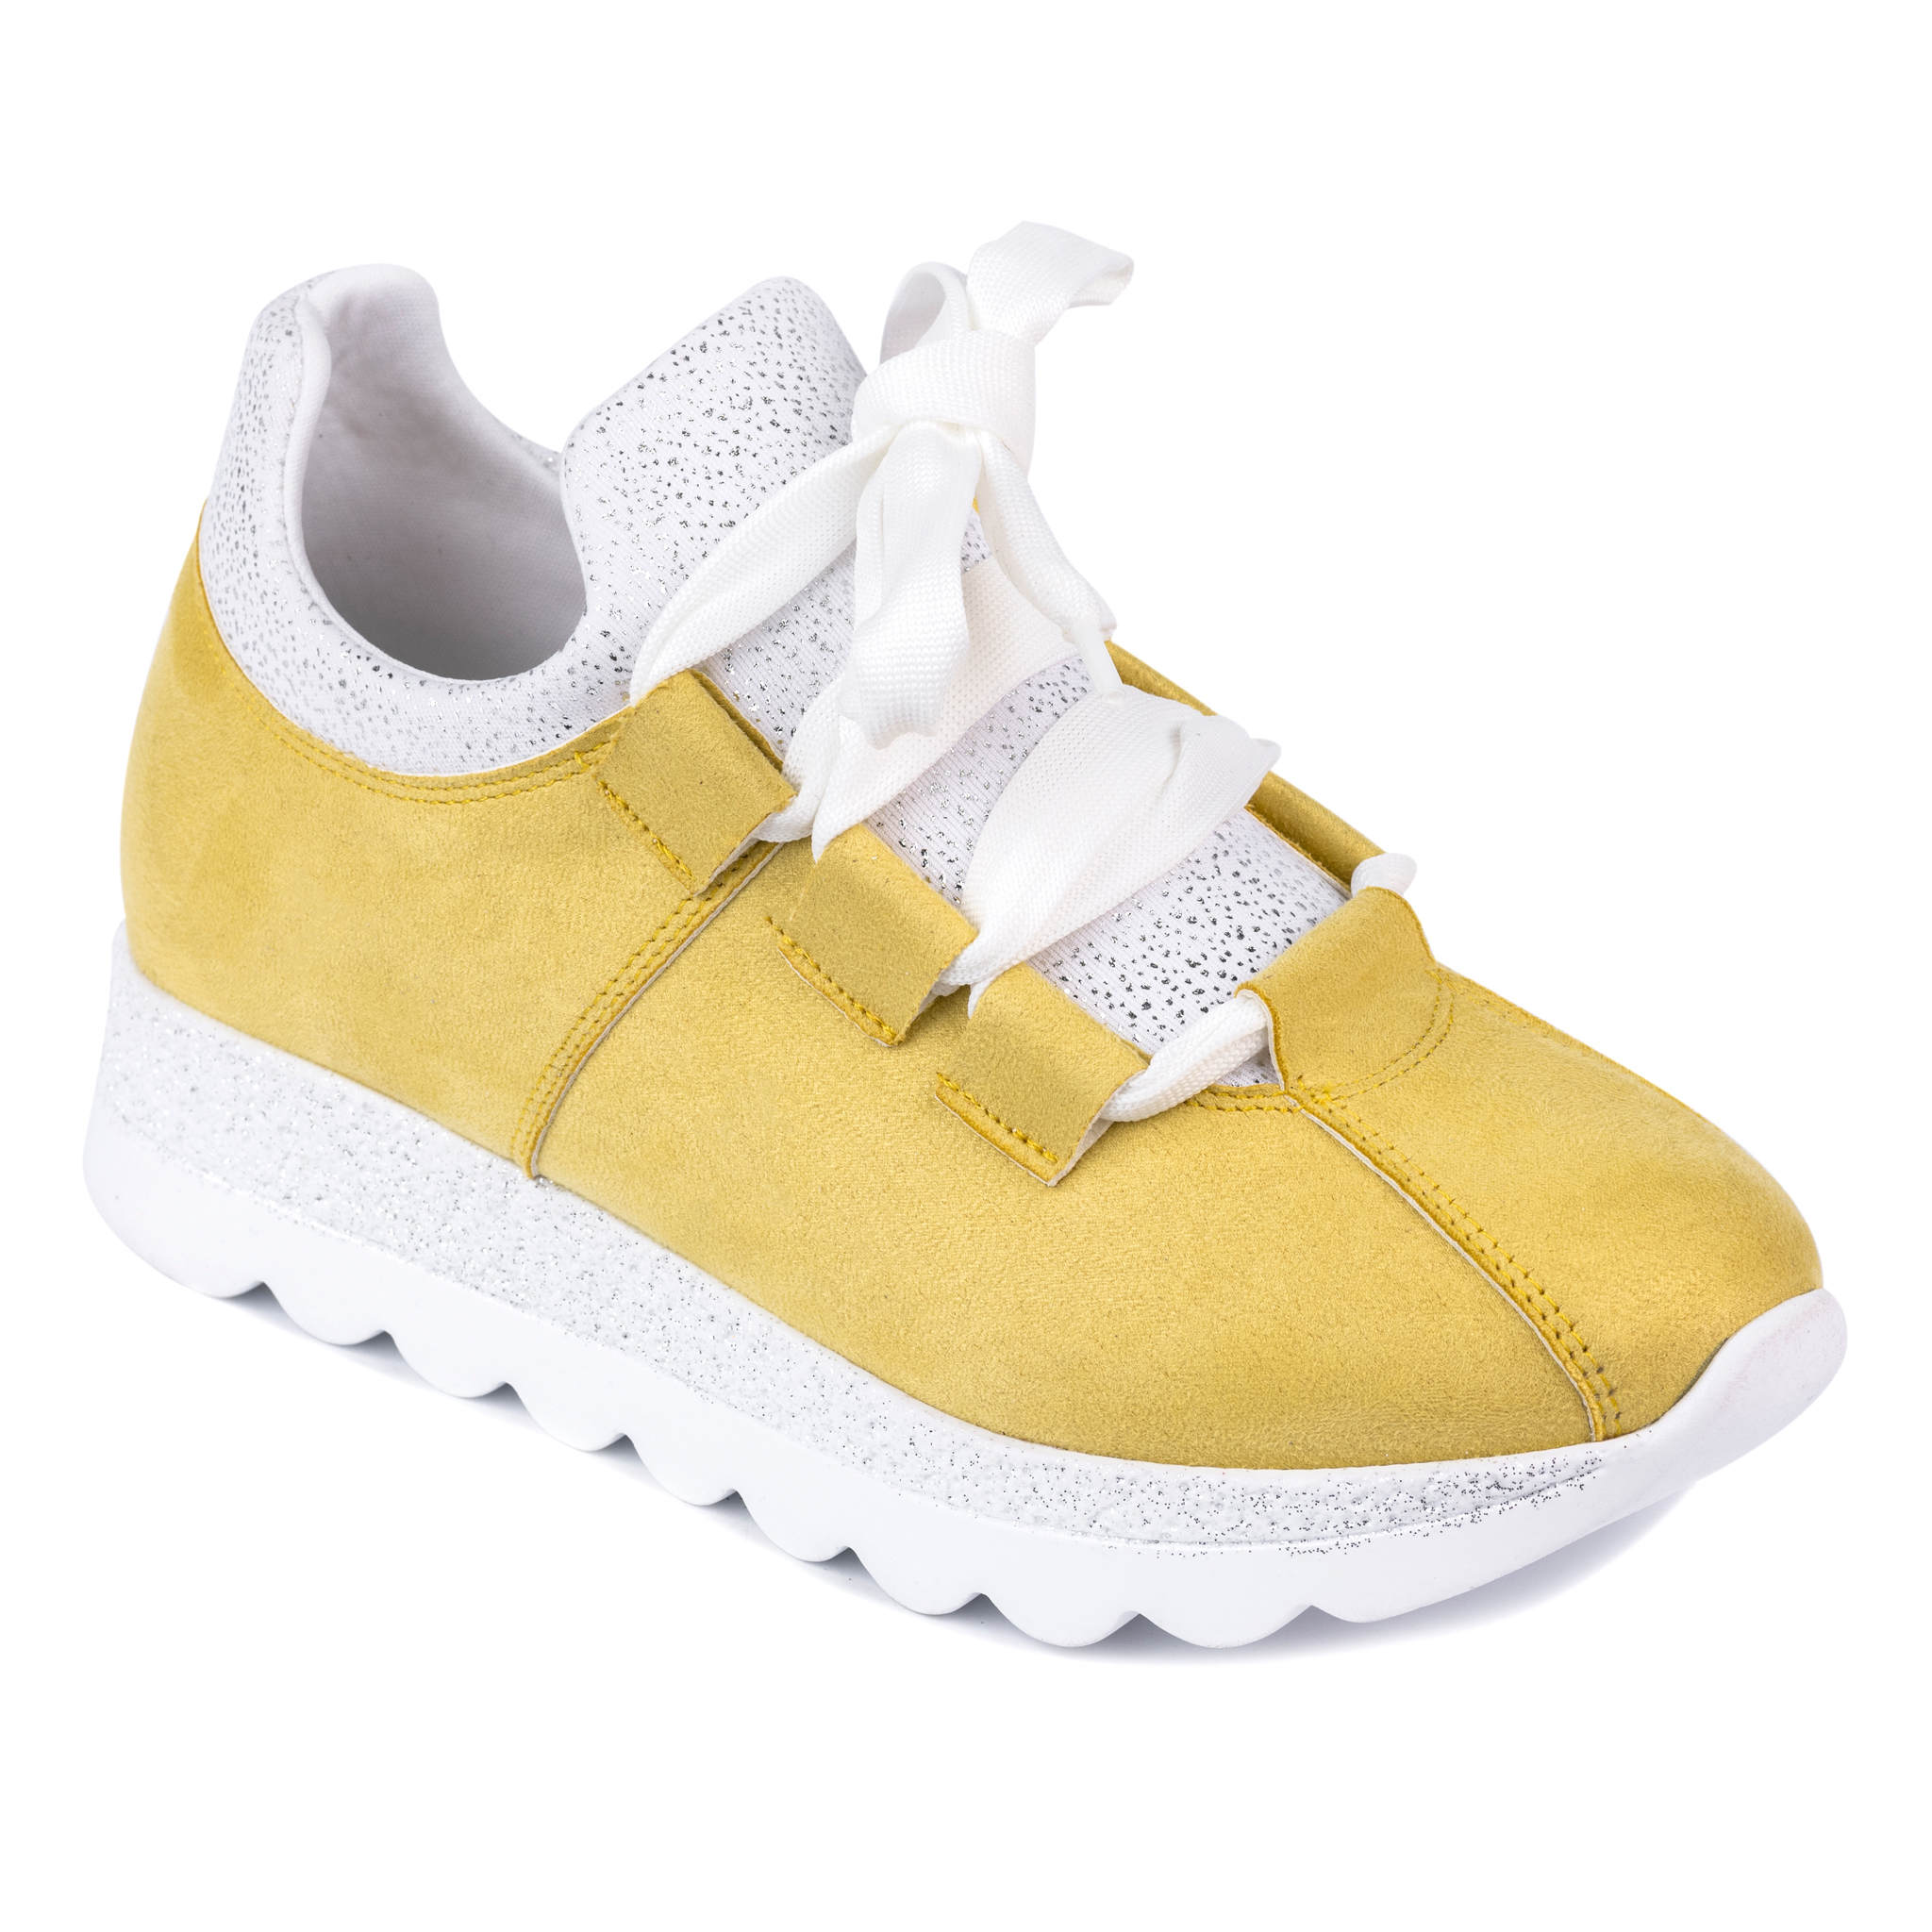 STRASS SNEAKERS - YELLOW